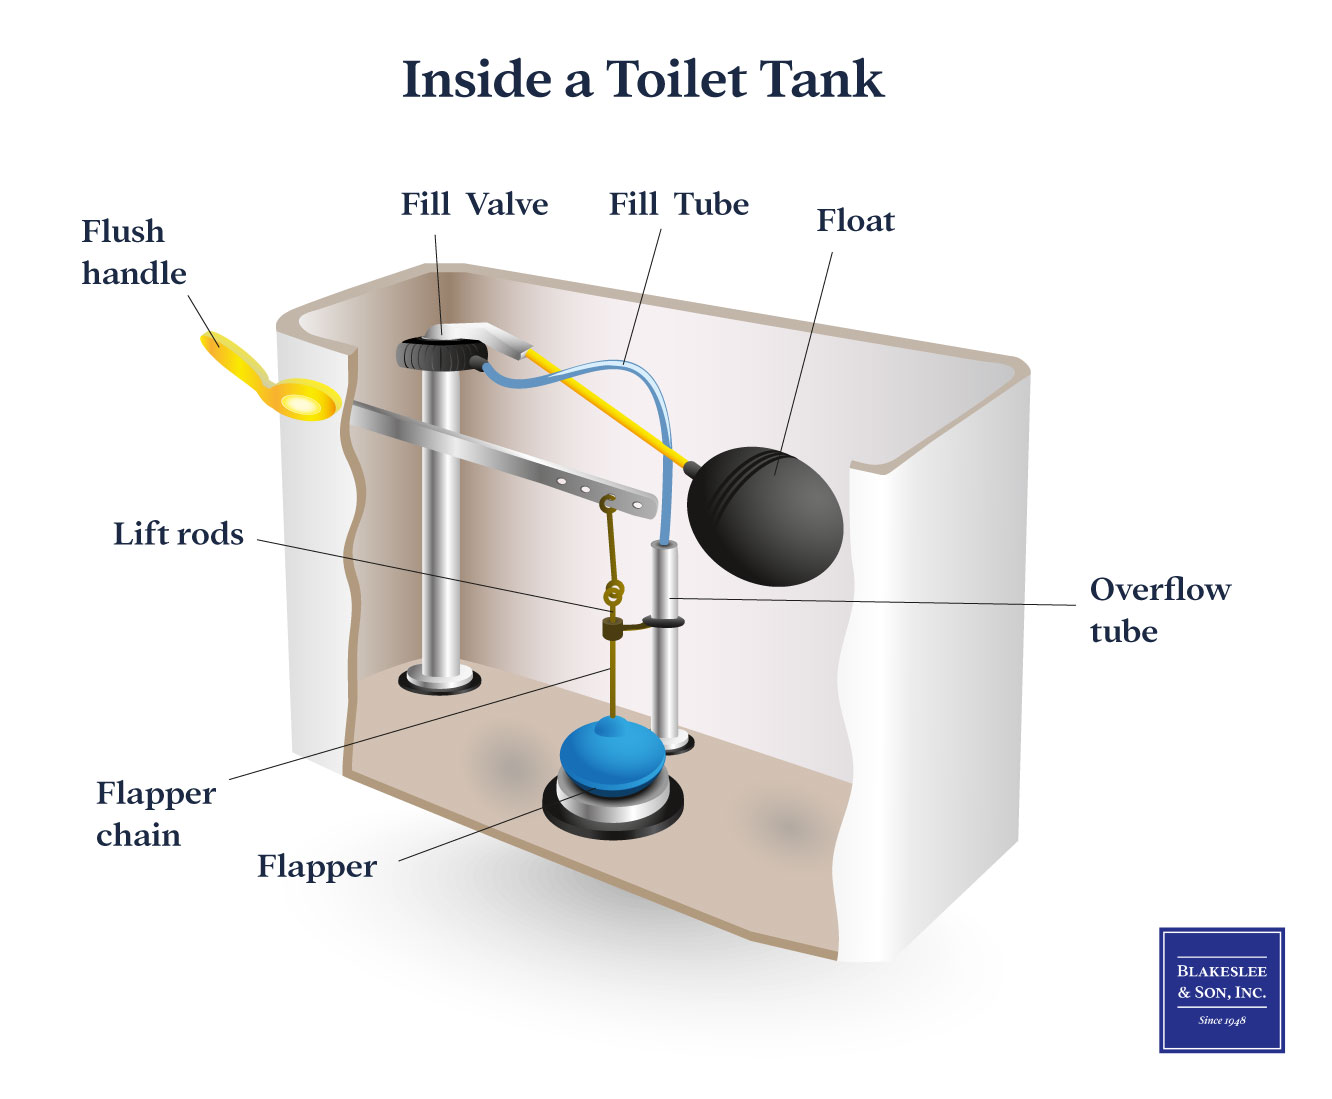 Diagram identifying and locating each part inside a toilet tank.